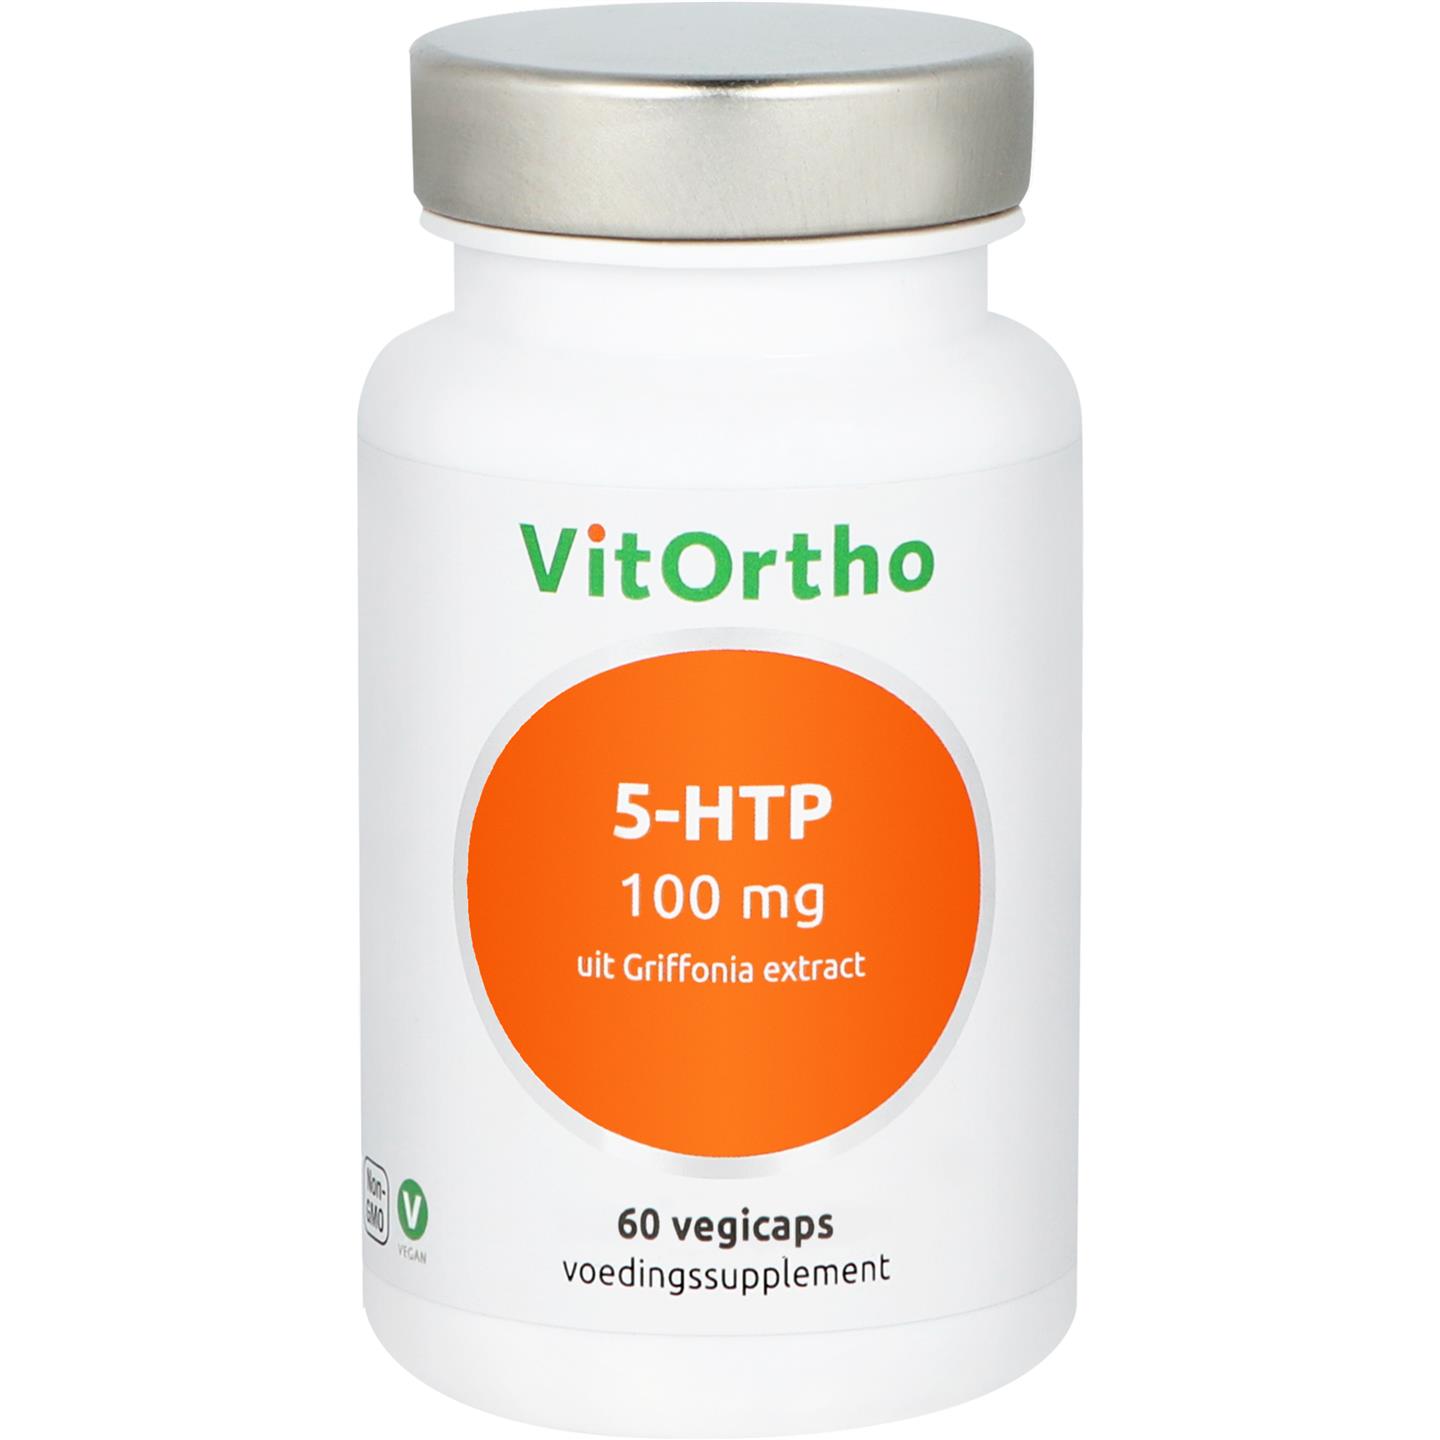 5-HTP 100 mg uit Griffonia extract